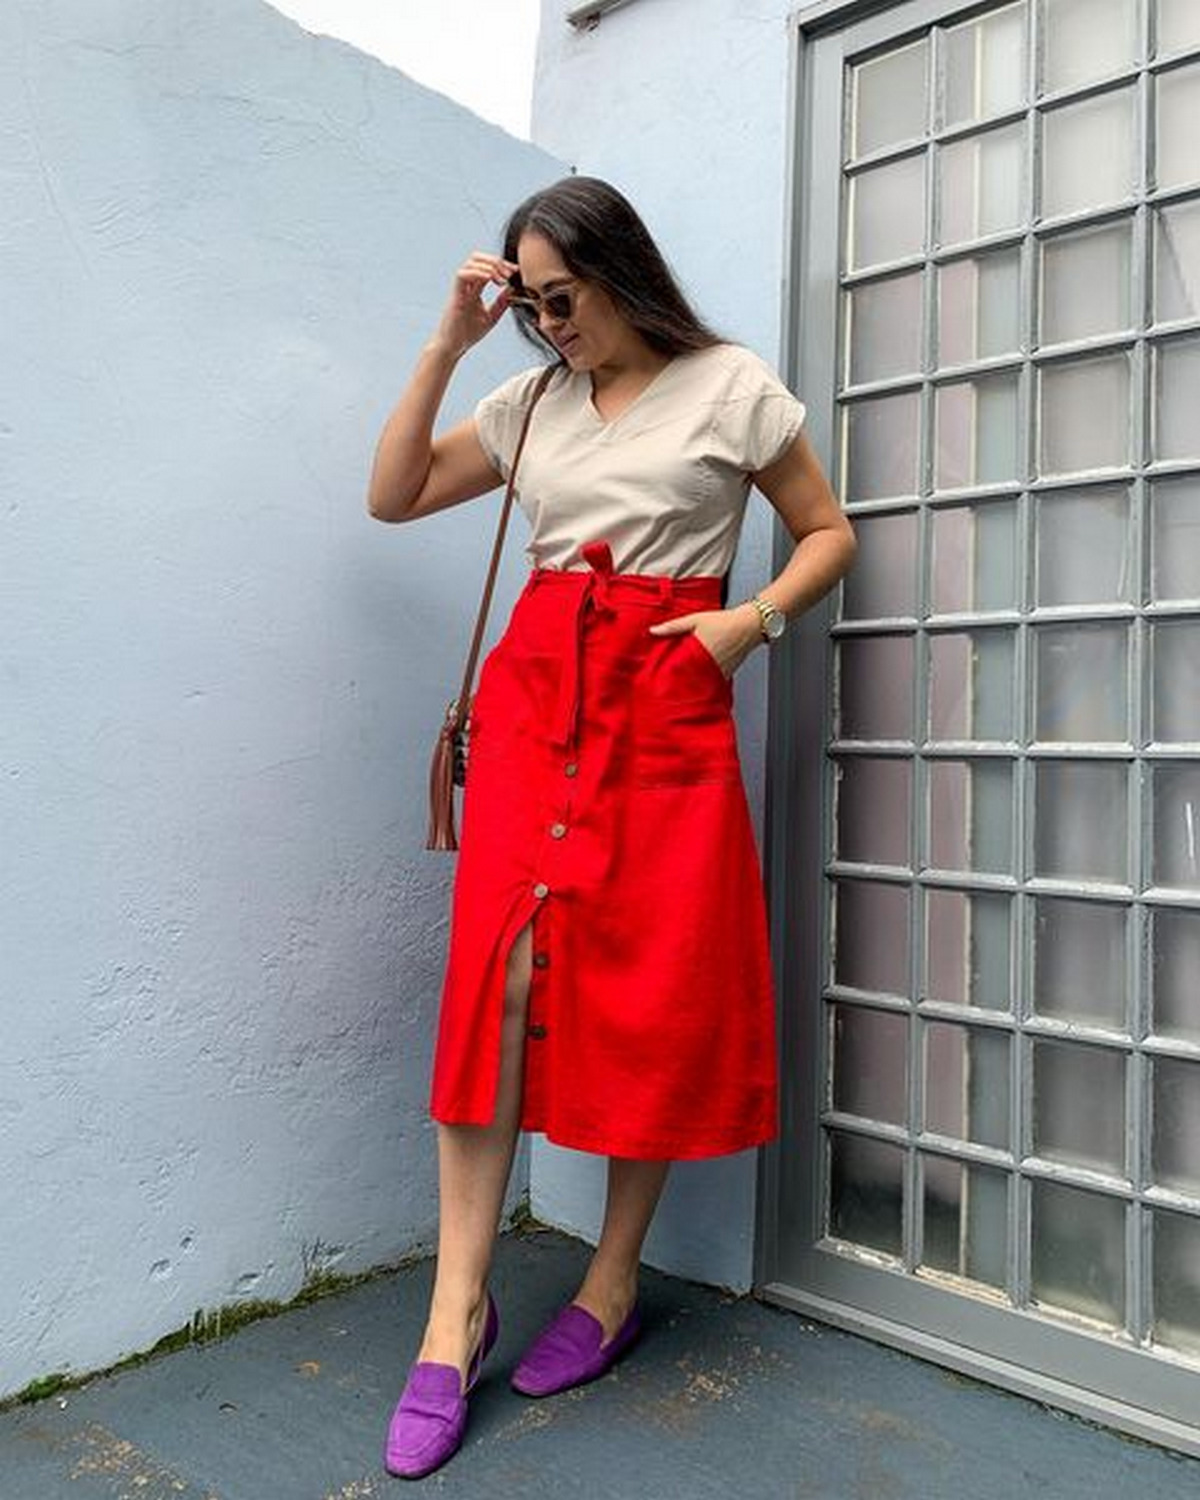 Beige V-neck Shirt With Red Skirt And Purple Loafers